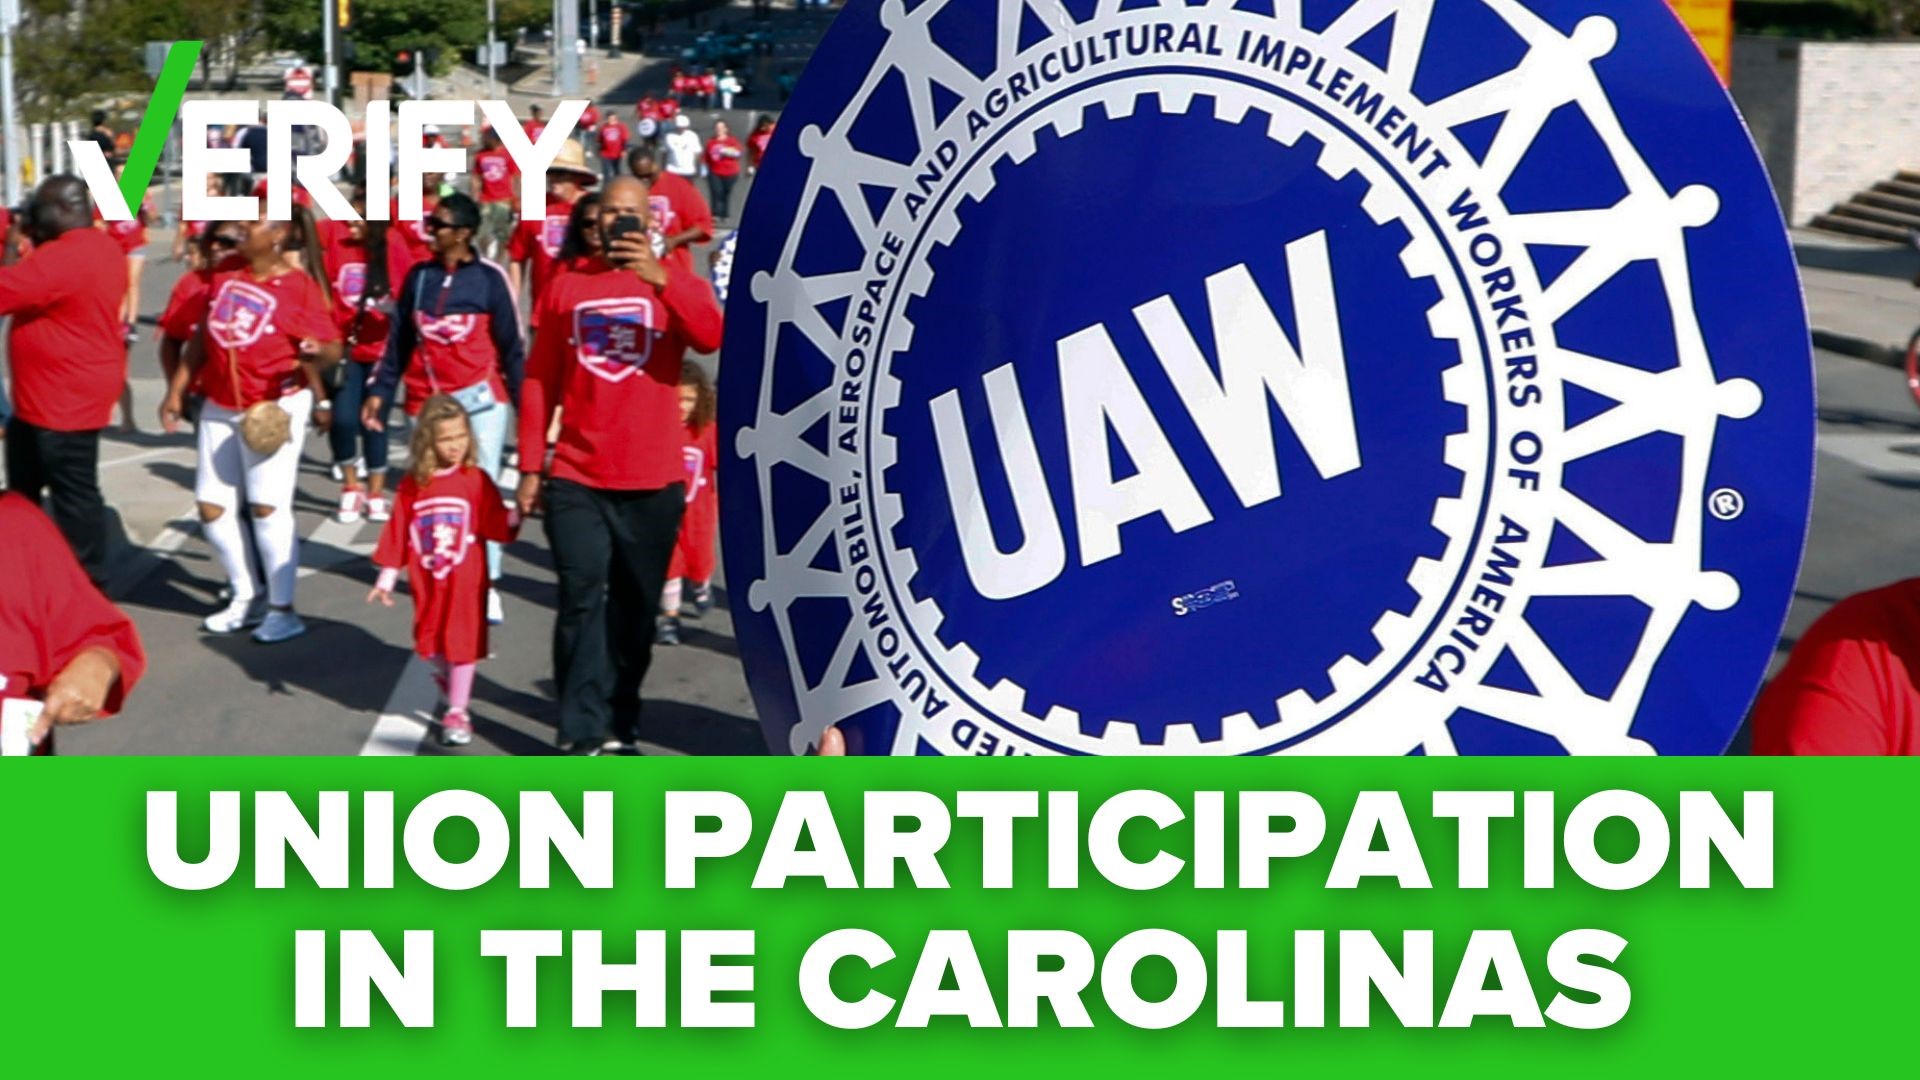 About 14 million Americans are part of a union, giving them a stronger voice in the workplace. But the Carolinas are among the states with the lowest union members.